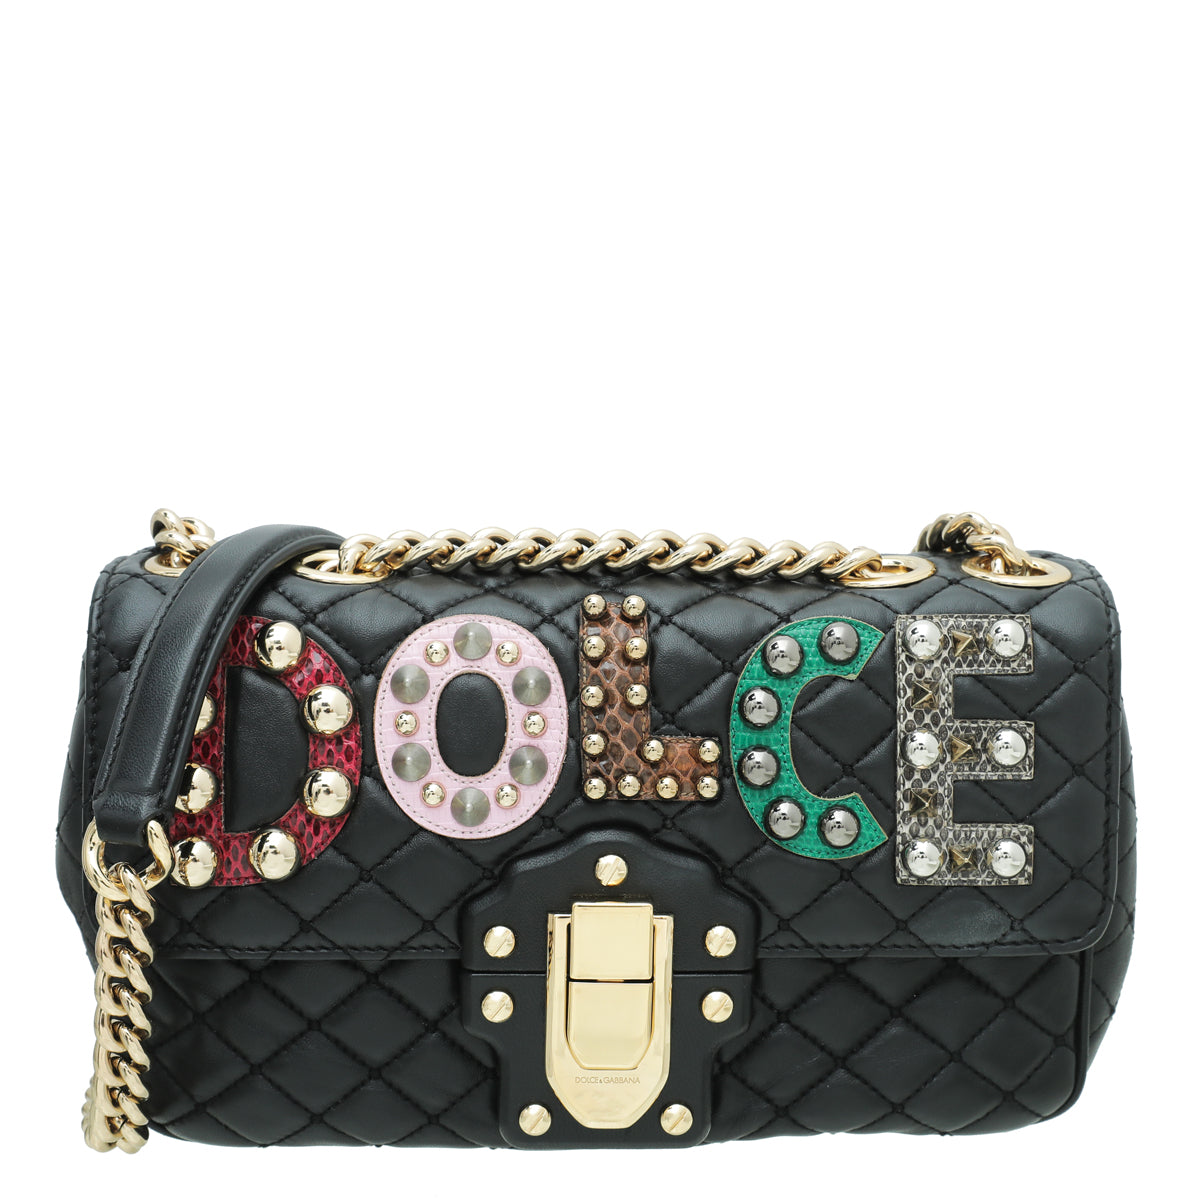 Dolce & Gabbana Black Lucia Quilted Embellished Chain Bag